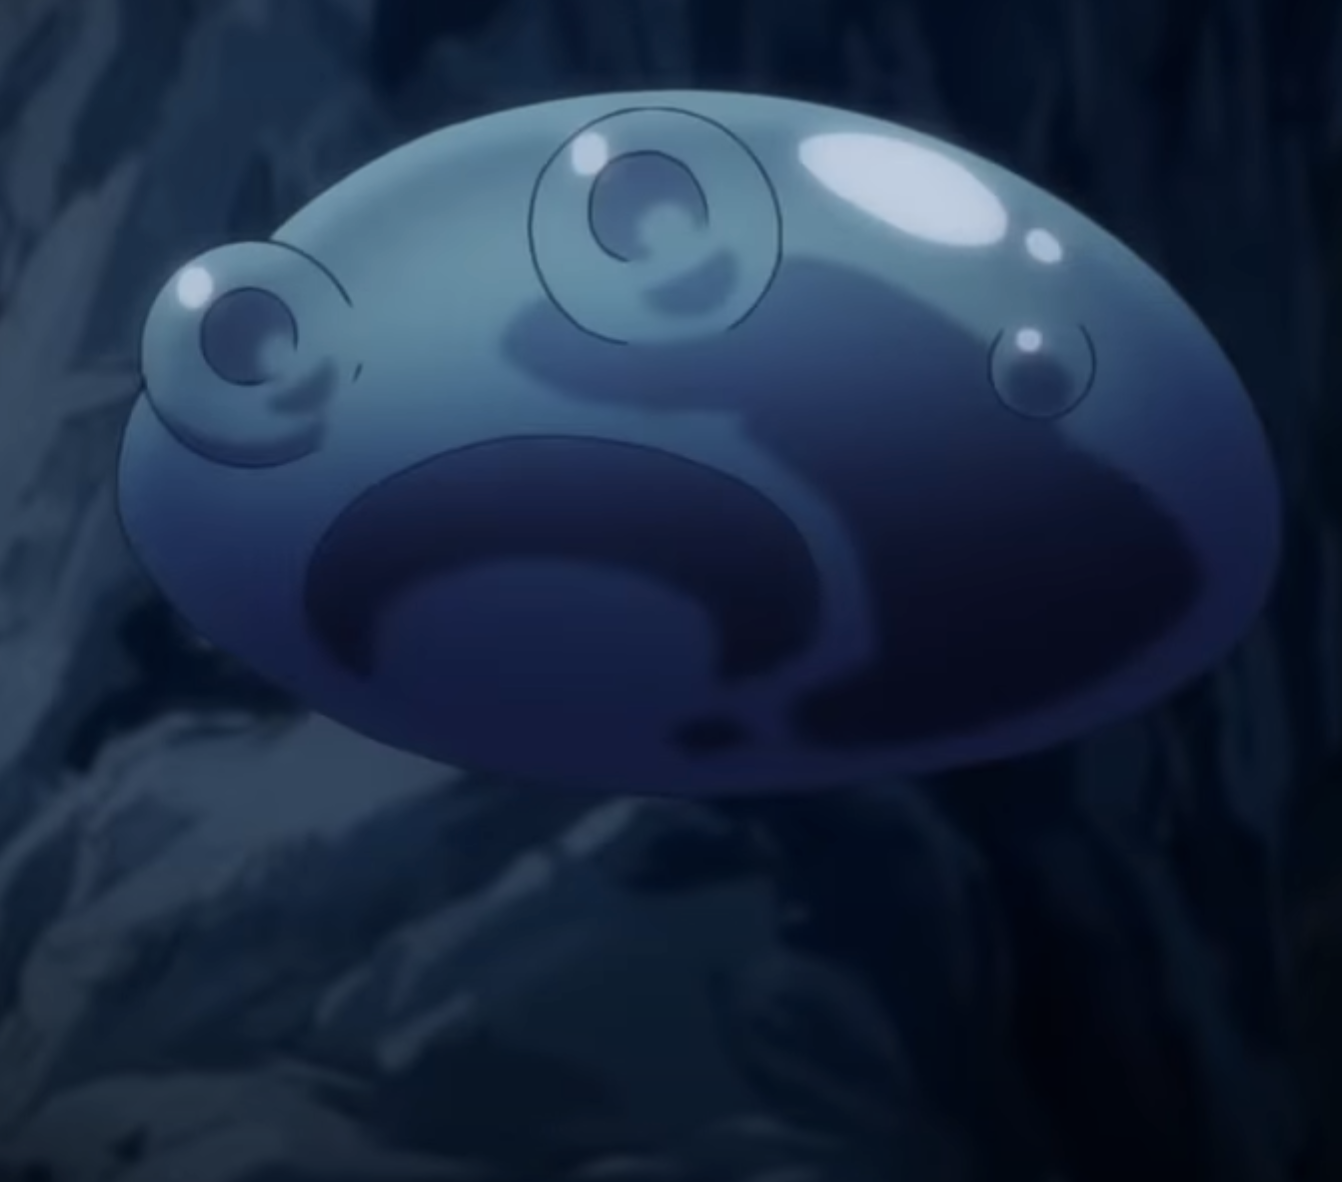 Rimuru the slime form with a shocked look on its face